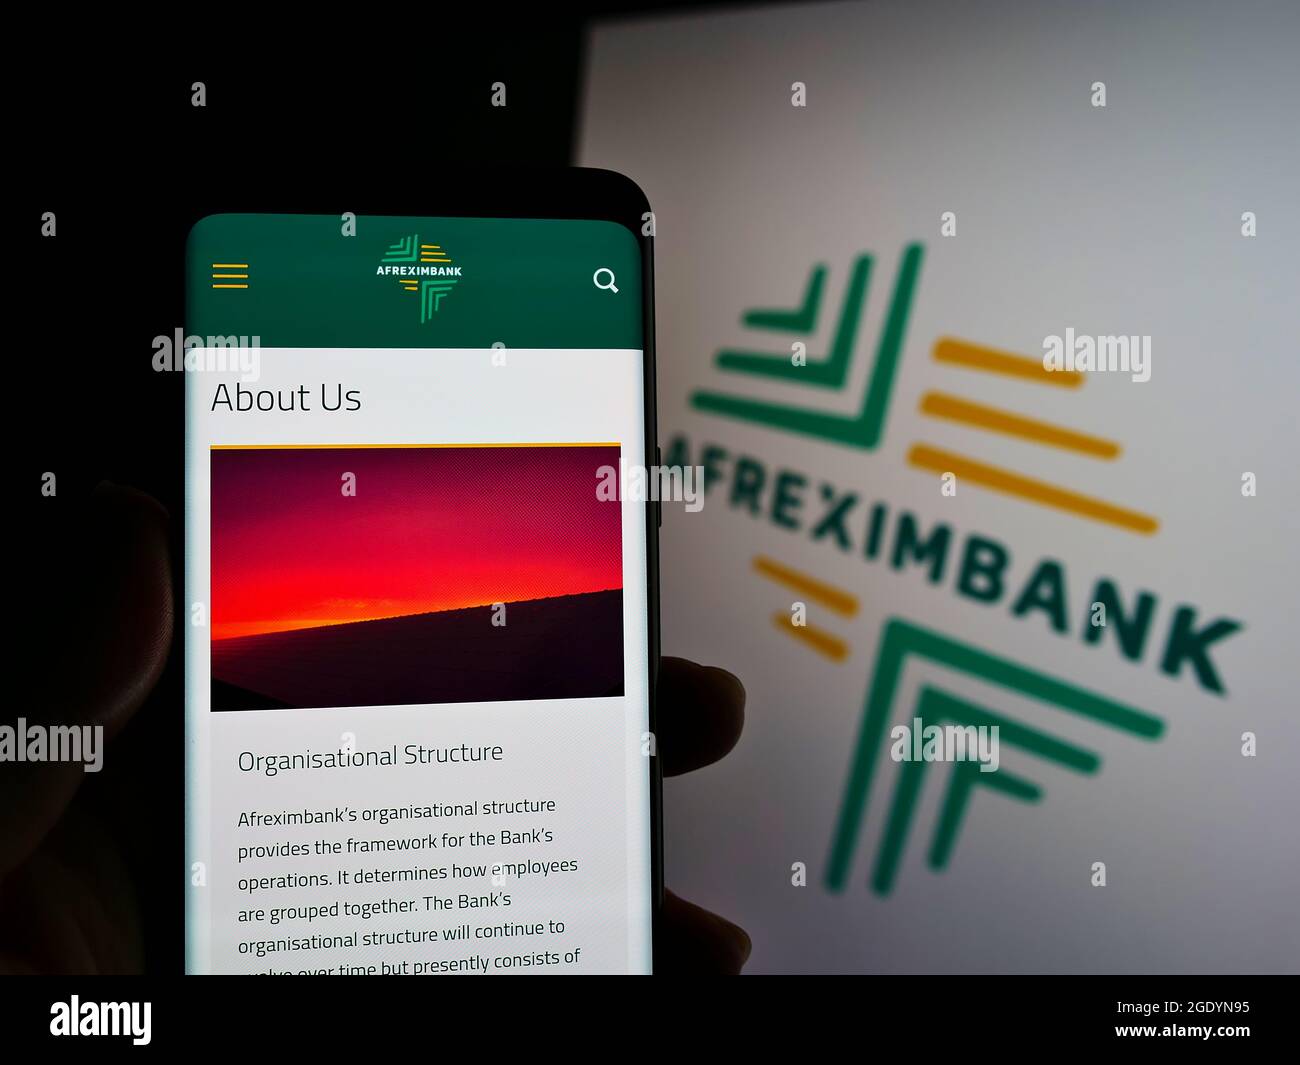 Person holding smartphone with website of company African Export–Import Bank (Afreximbank) on screen with logo. Focus on center of phone display. Stock Photo